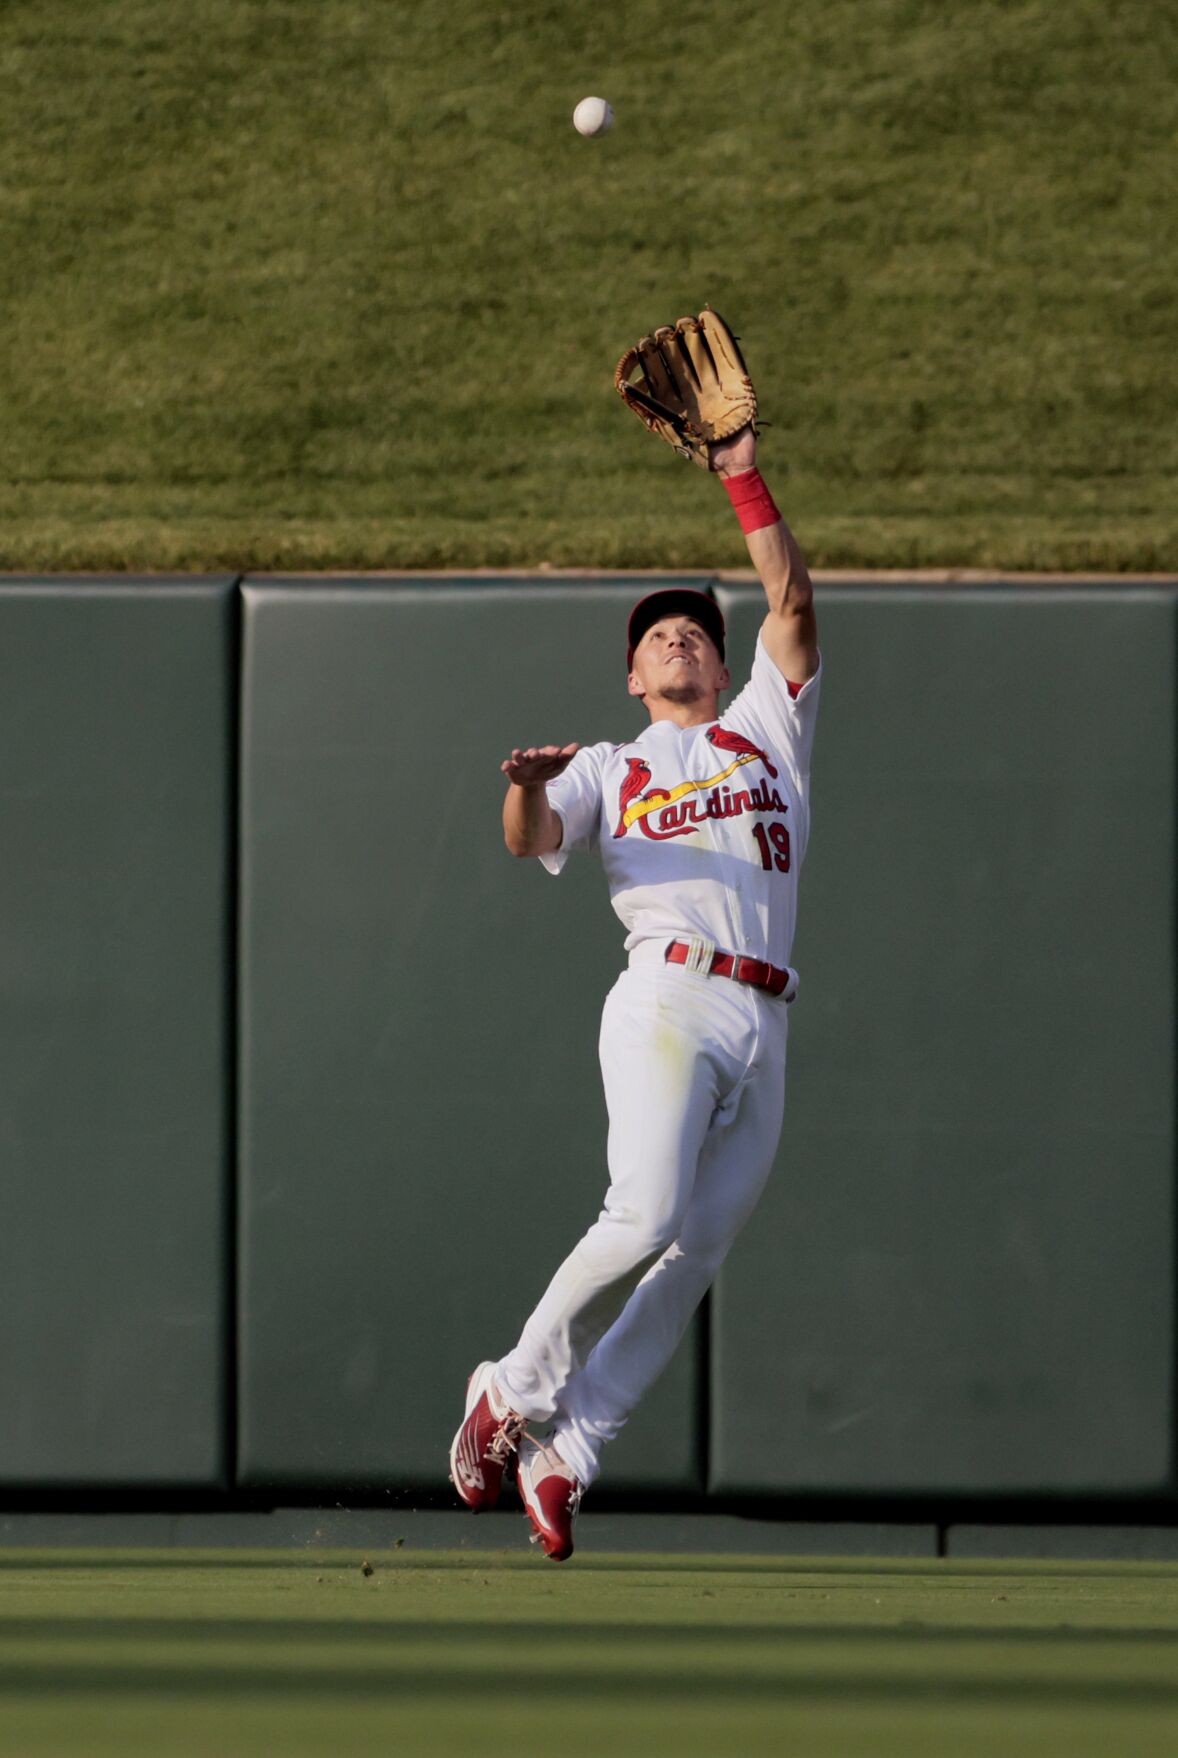 Cardinals manage only three hits in 6-0 loss to Astros Midwest